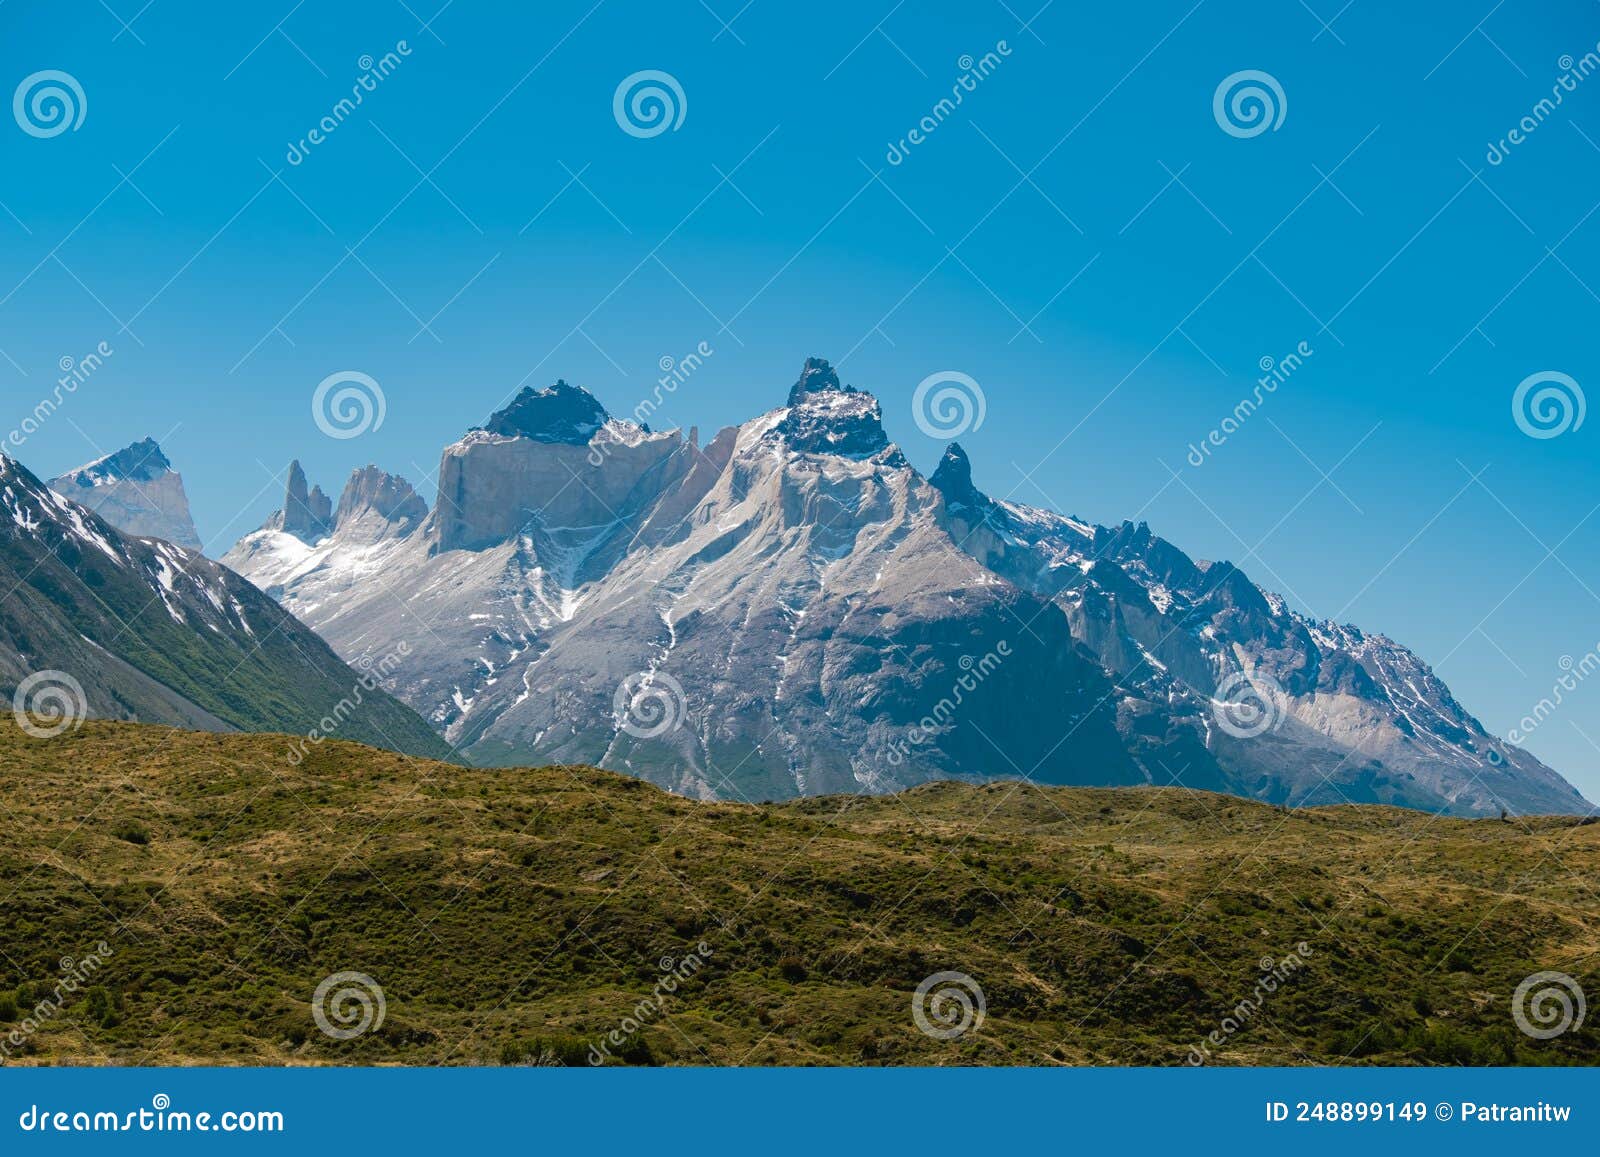 guernos mountains with clear blue sky, torres del paine national park  in chile